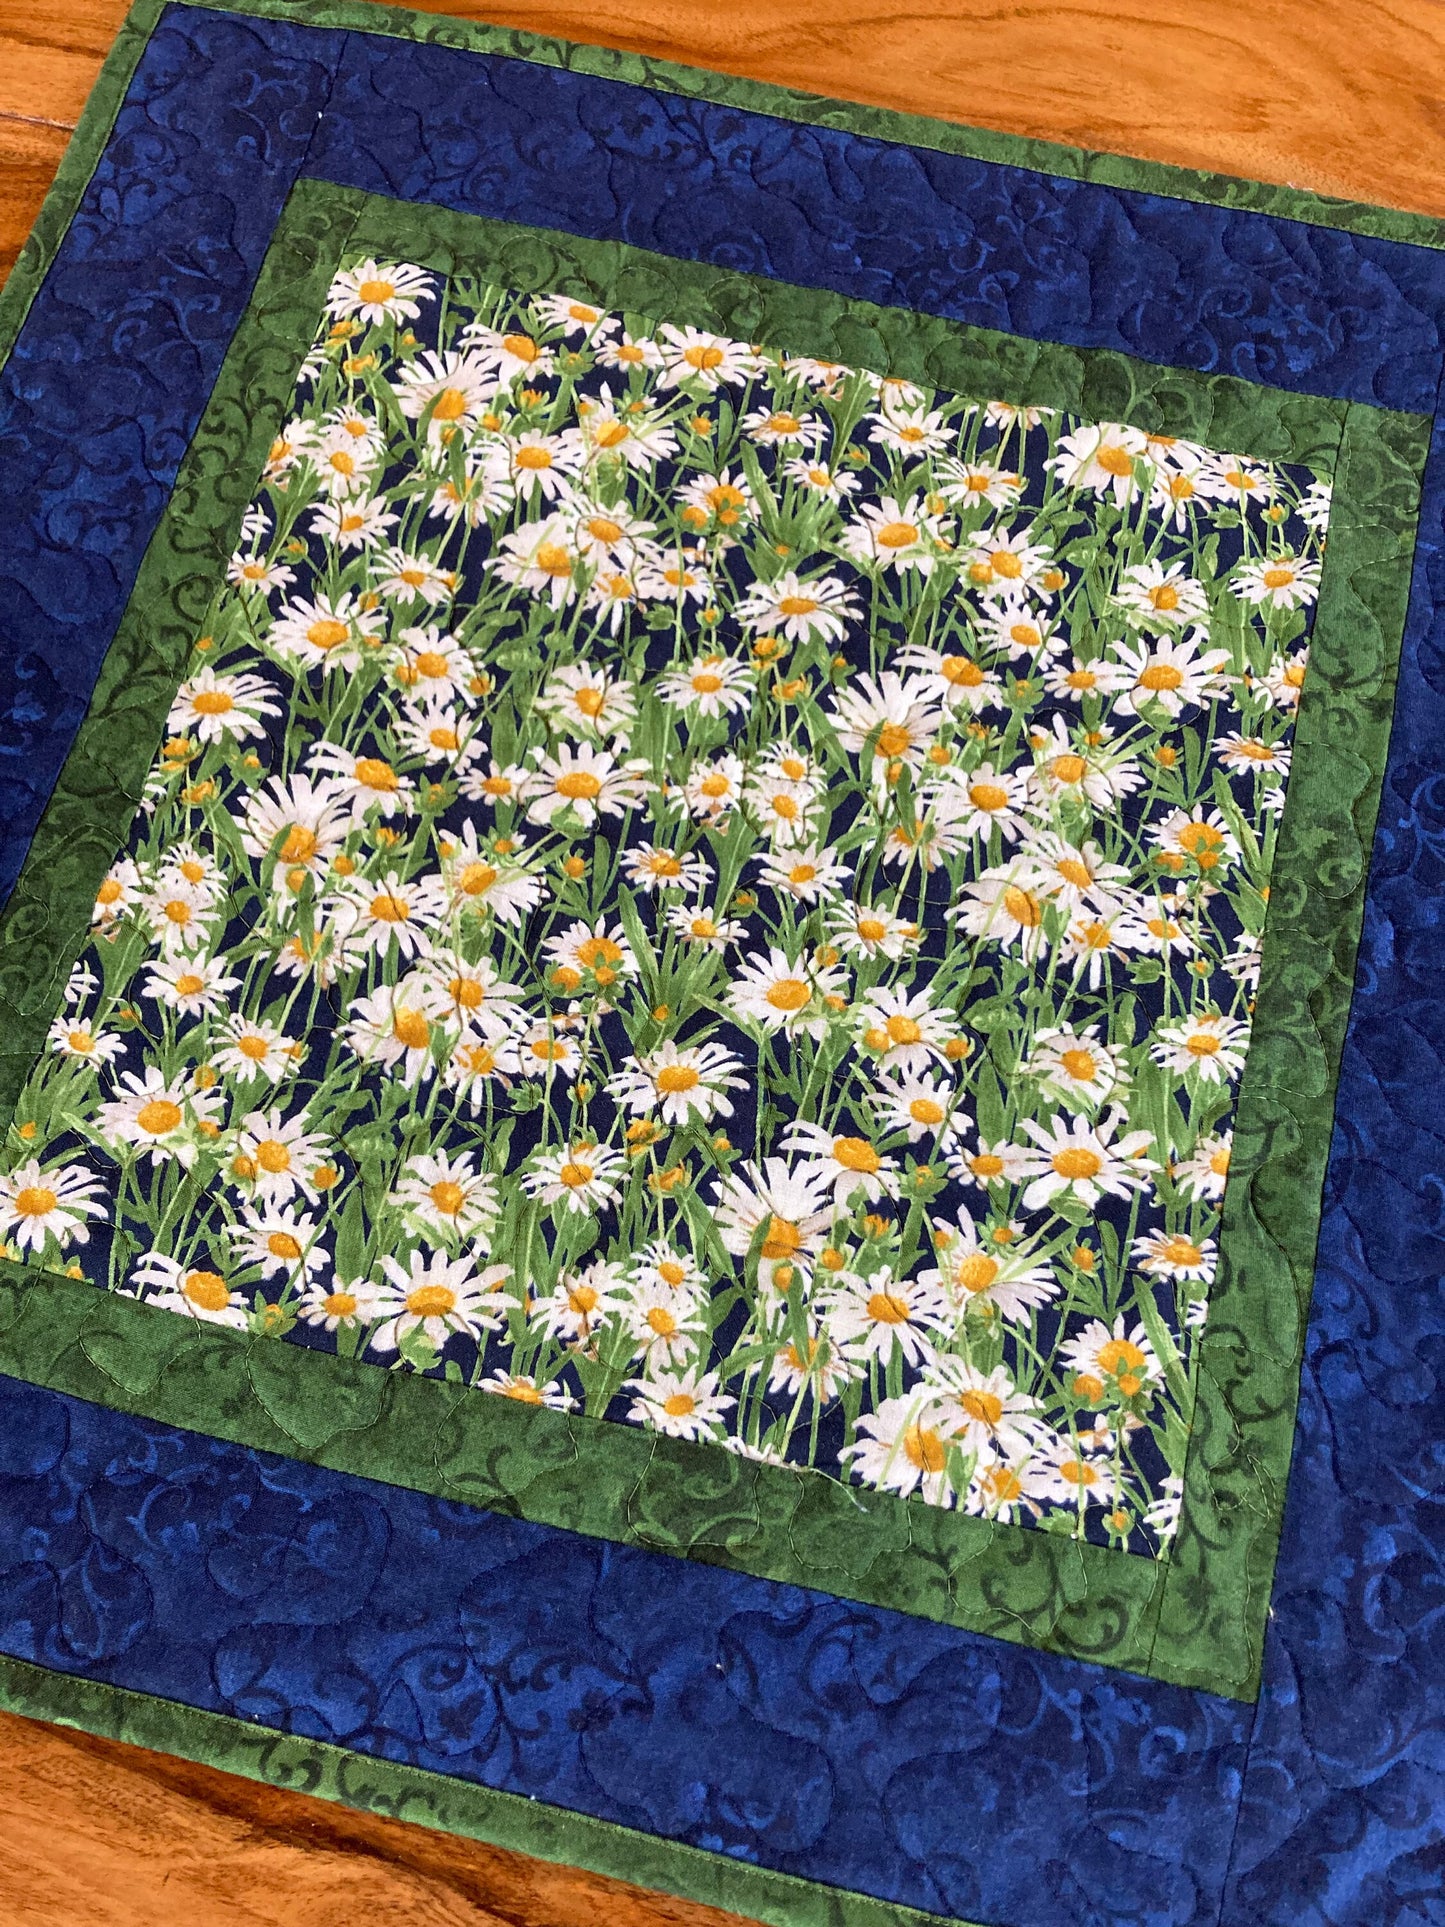 White Daisy Garden Quilted Table Topper, Large Square Coffee Table Reversible 20x20" Summer End Table, Everyday Kitchen, Cottage Country